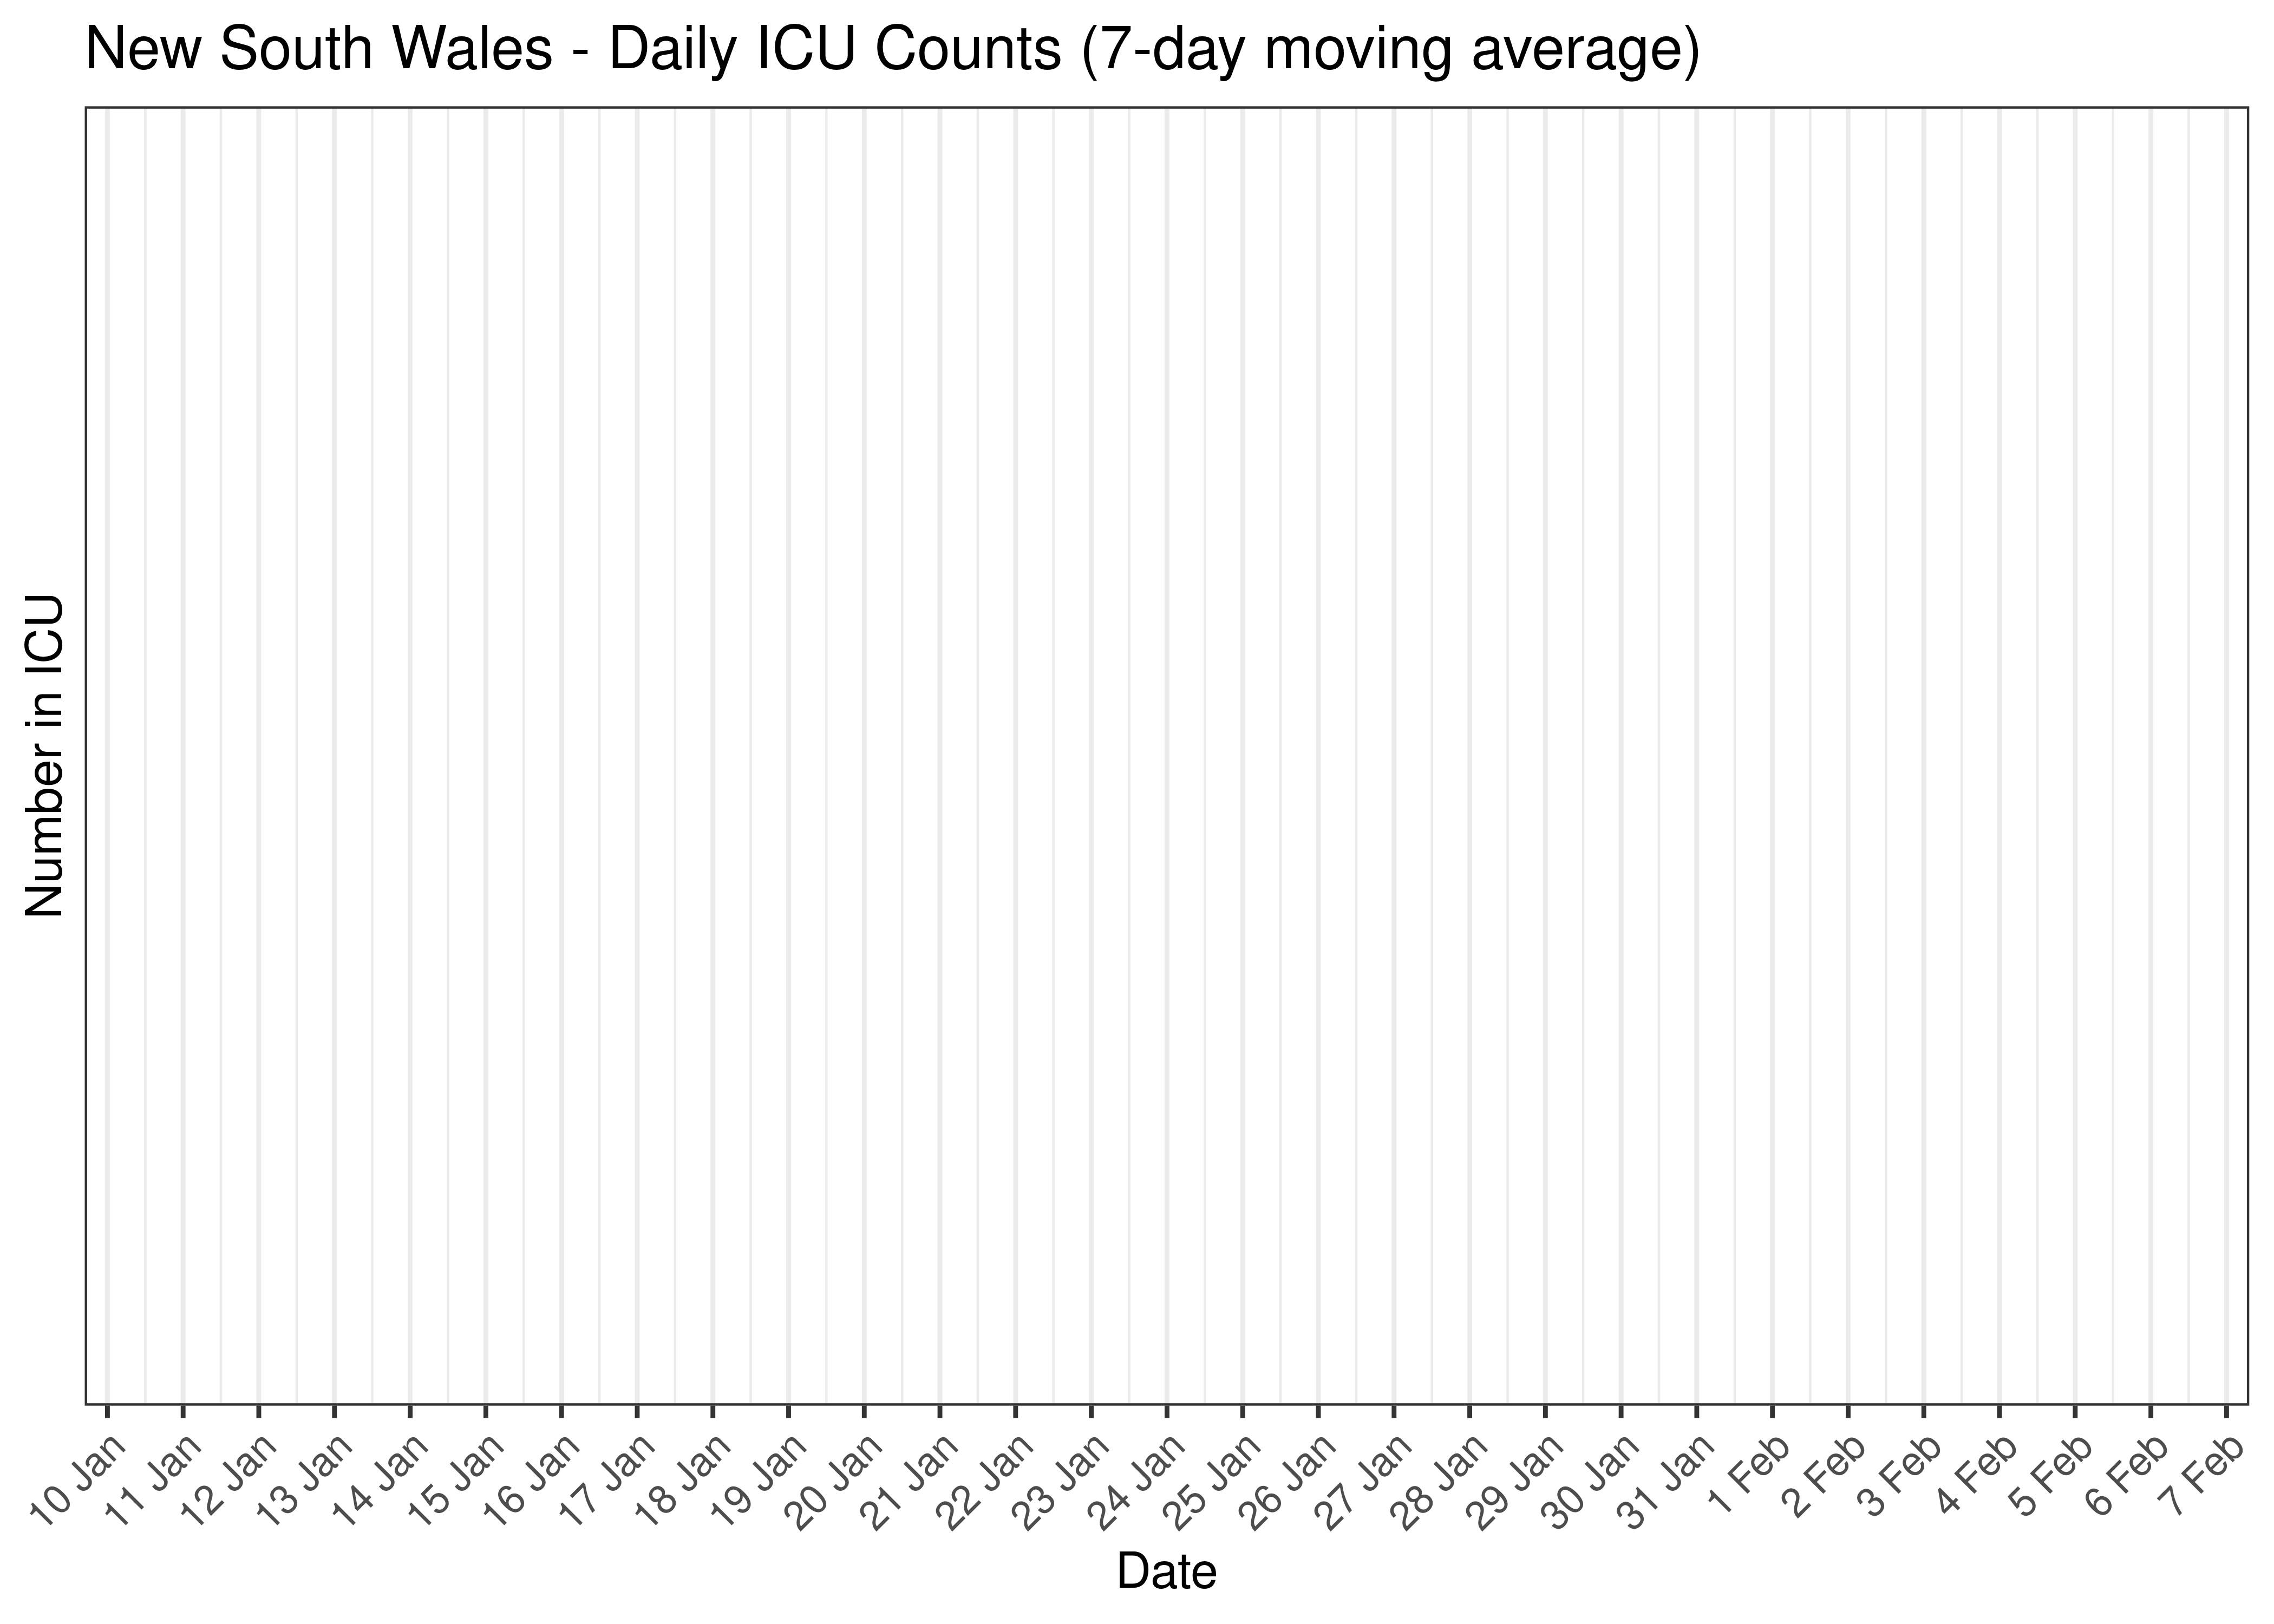 New South Wales - Daily Hospital Counts (7-day moving average)